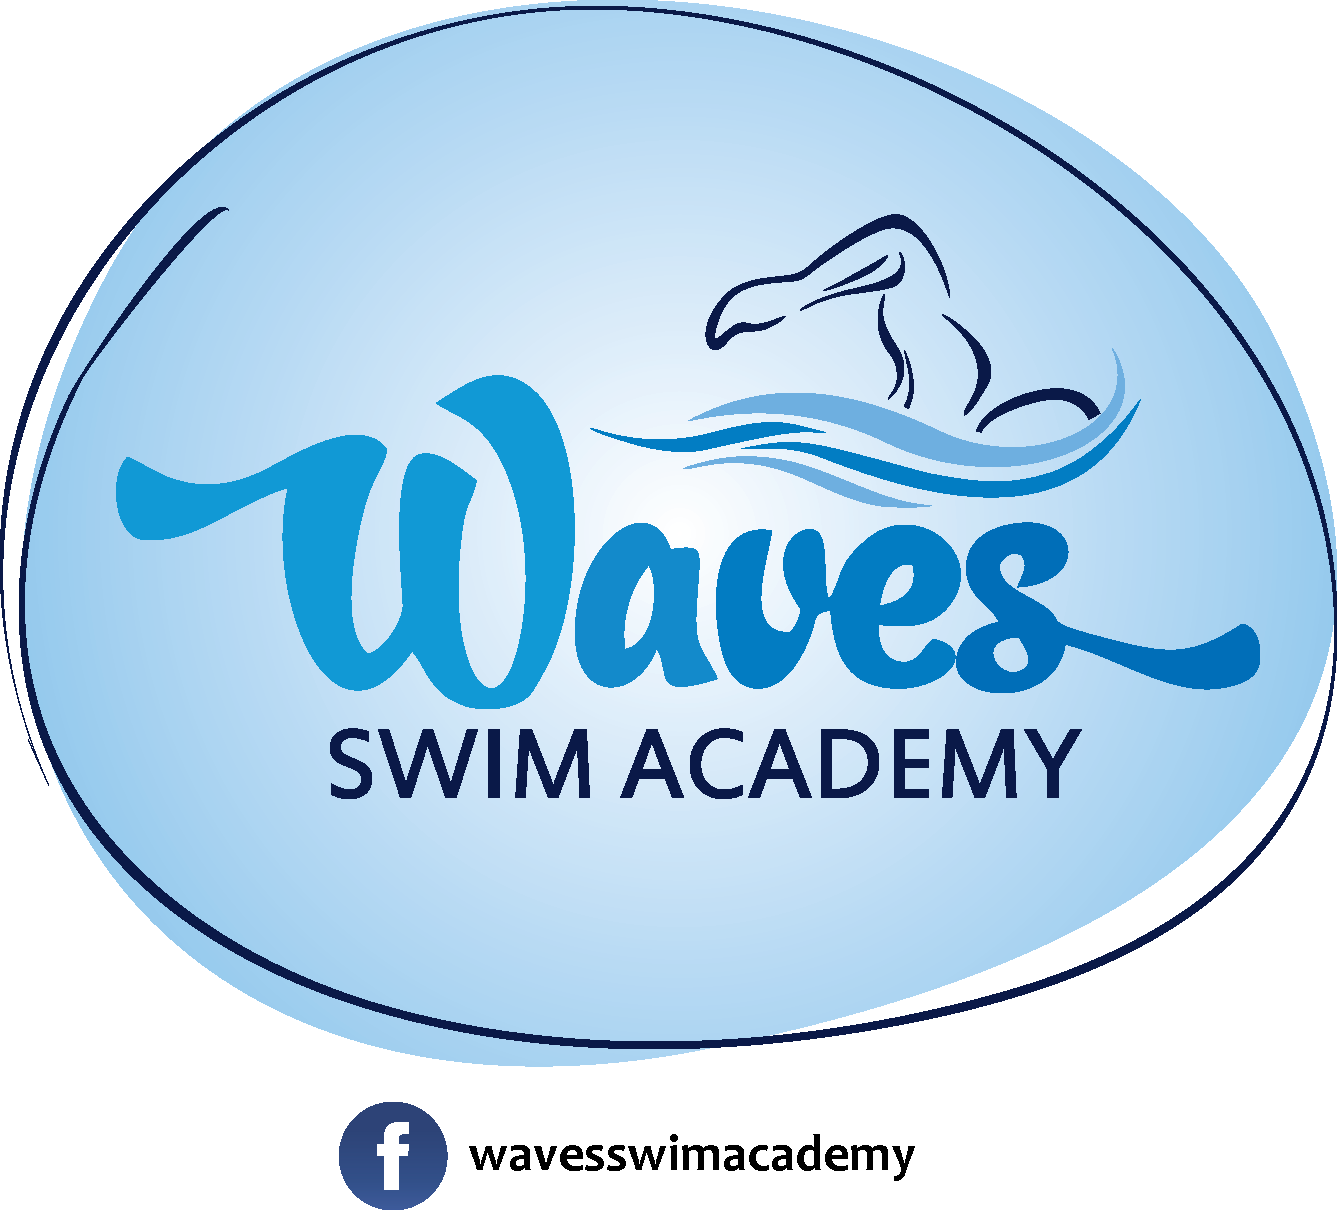 Swimming Courses in Chennai